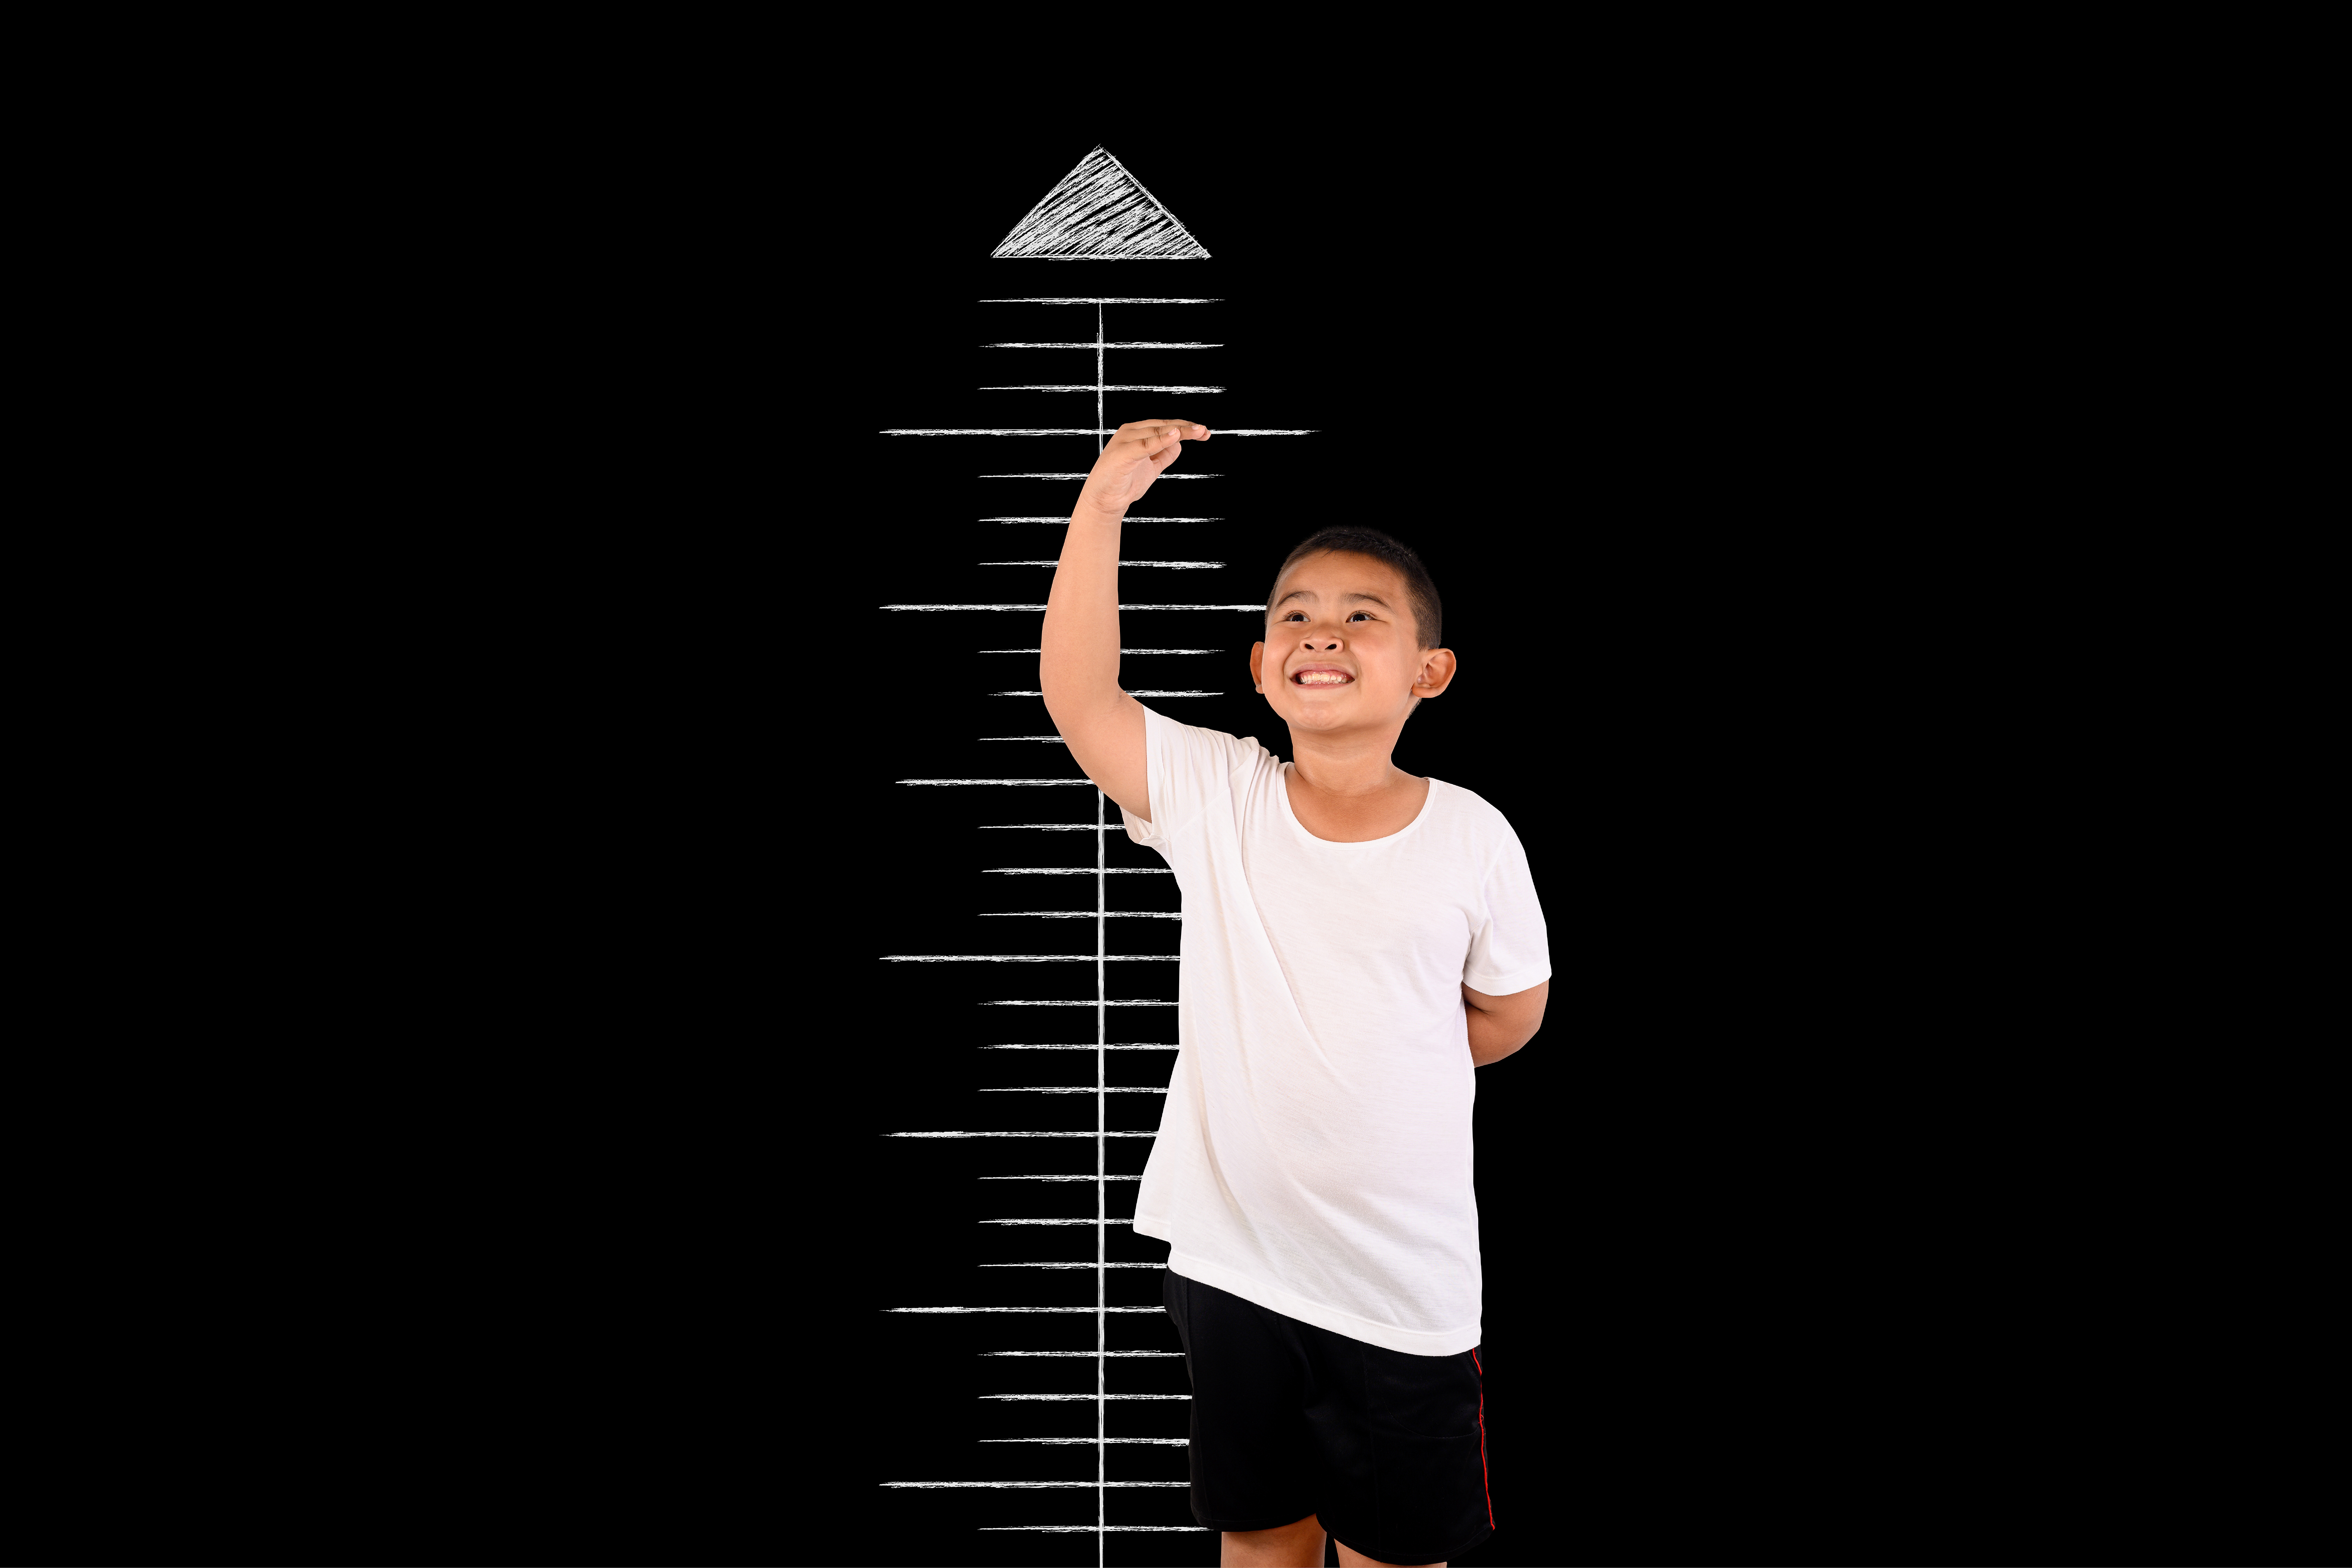  Height and Weight Chart for Boys and Girls | Informationneeds.com